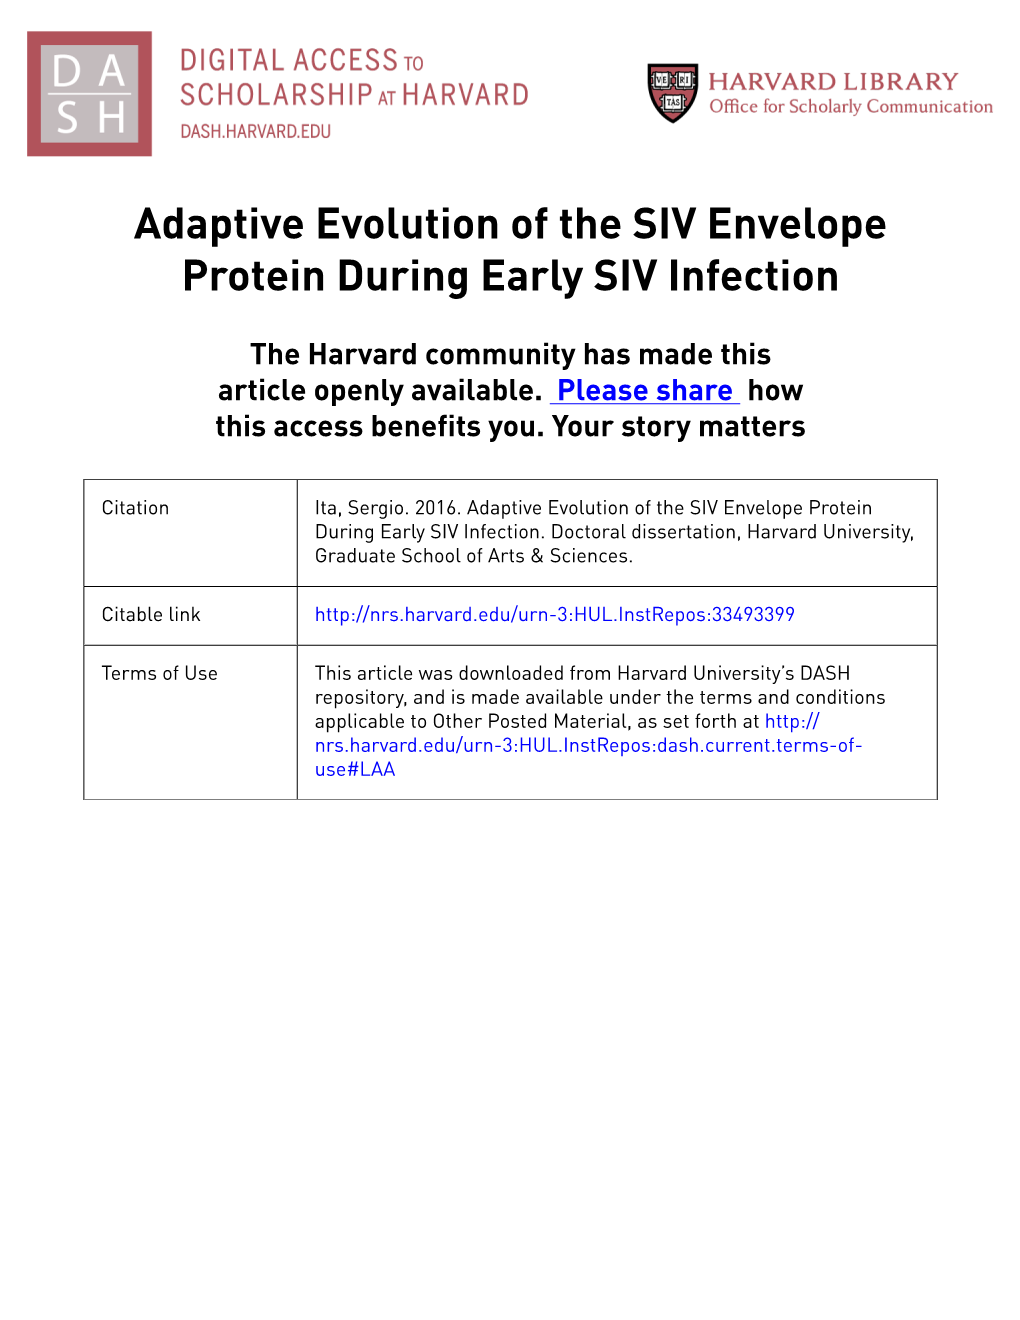 Adaptive Evolution of the SIV Envelope Protein During Early SIV Infection